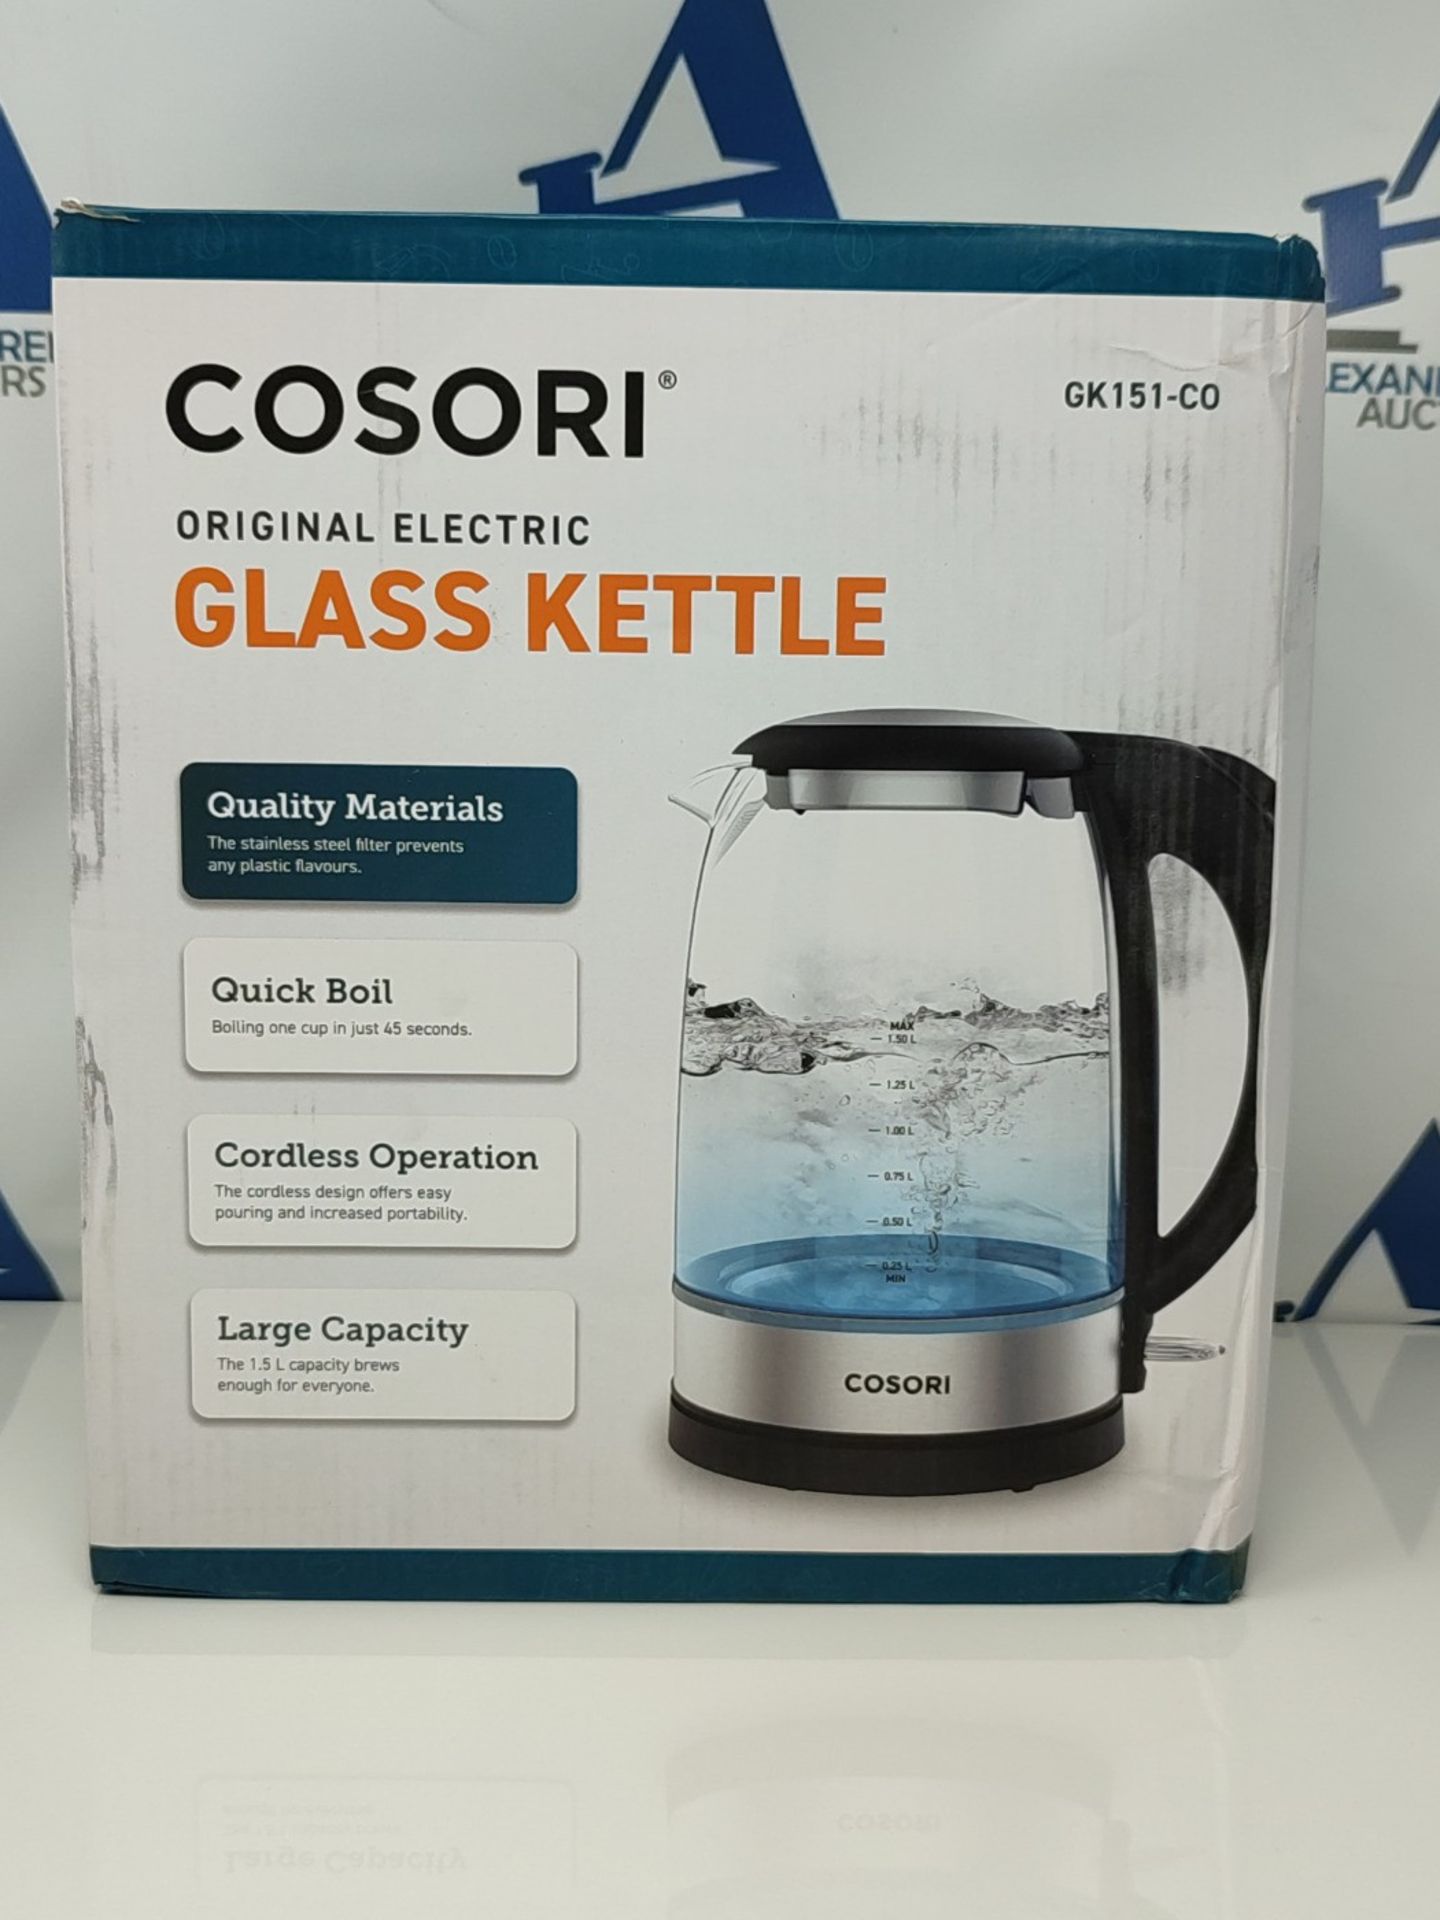 COSORI Electric Kettle Glass, Fast Boil Quiet, 3000W 1.5L with Blue LED, Stainless Ste - Image 2 of 3